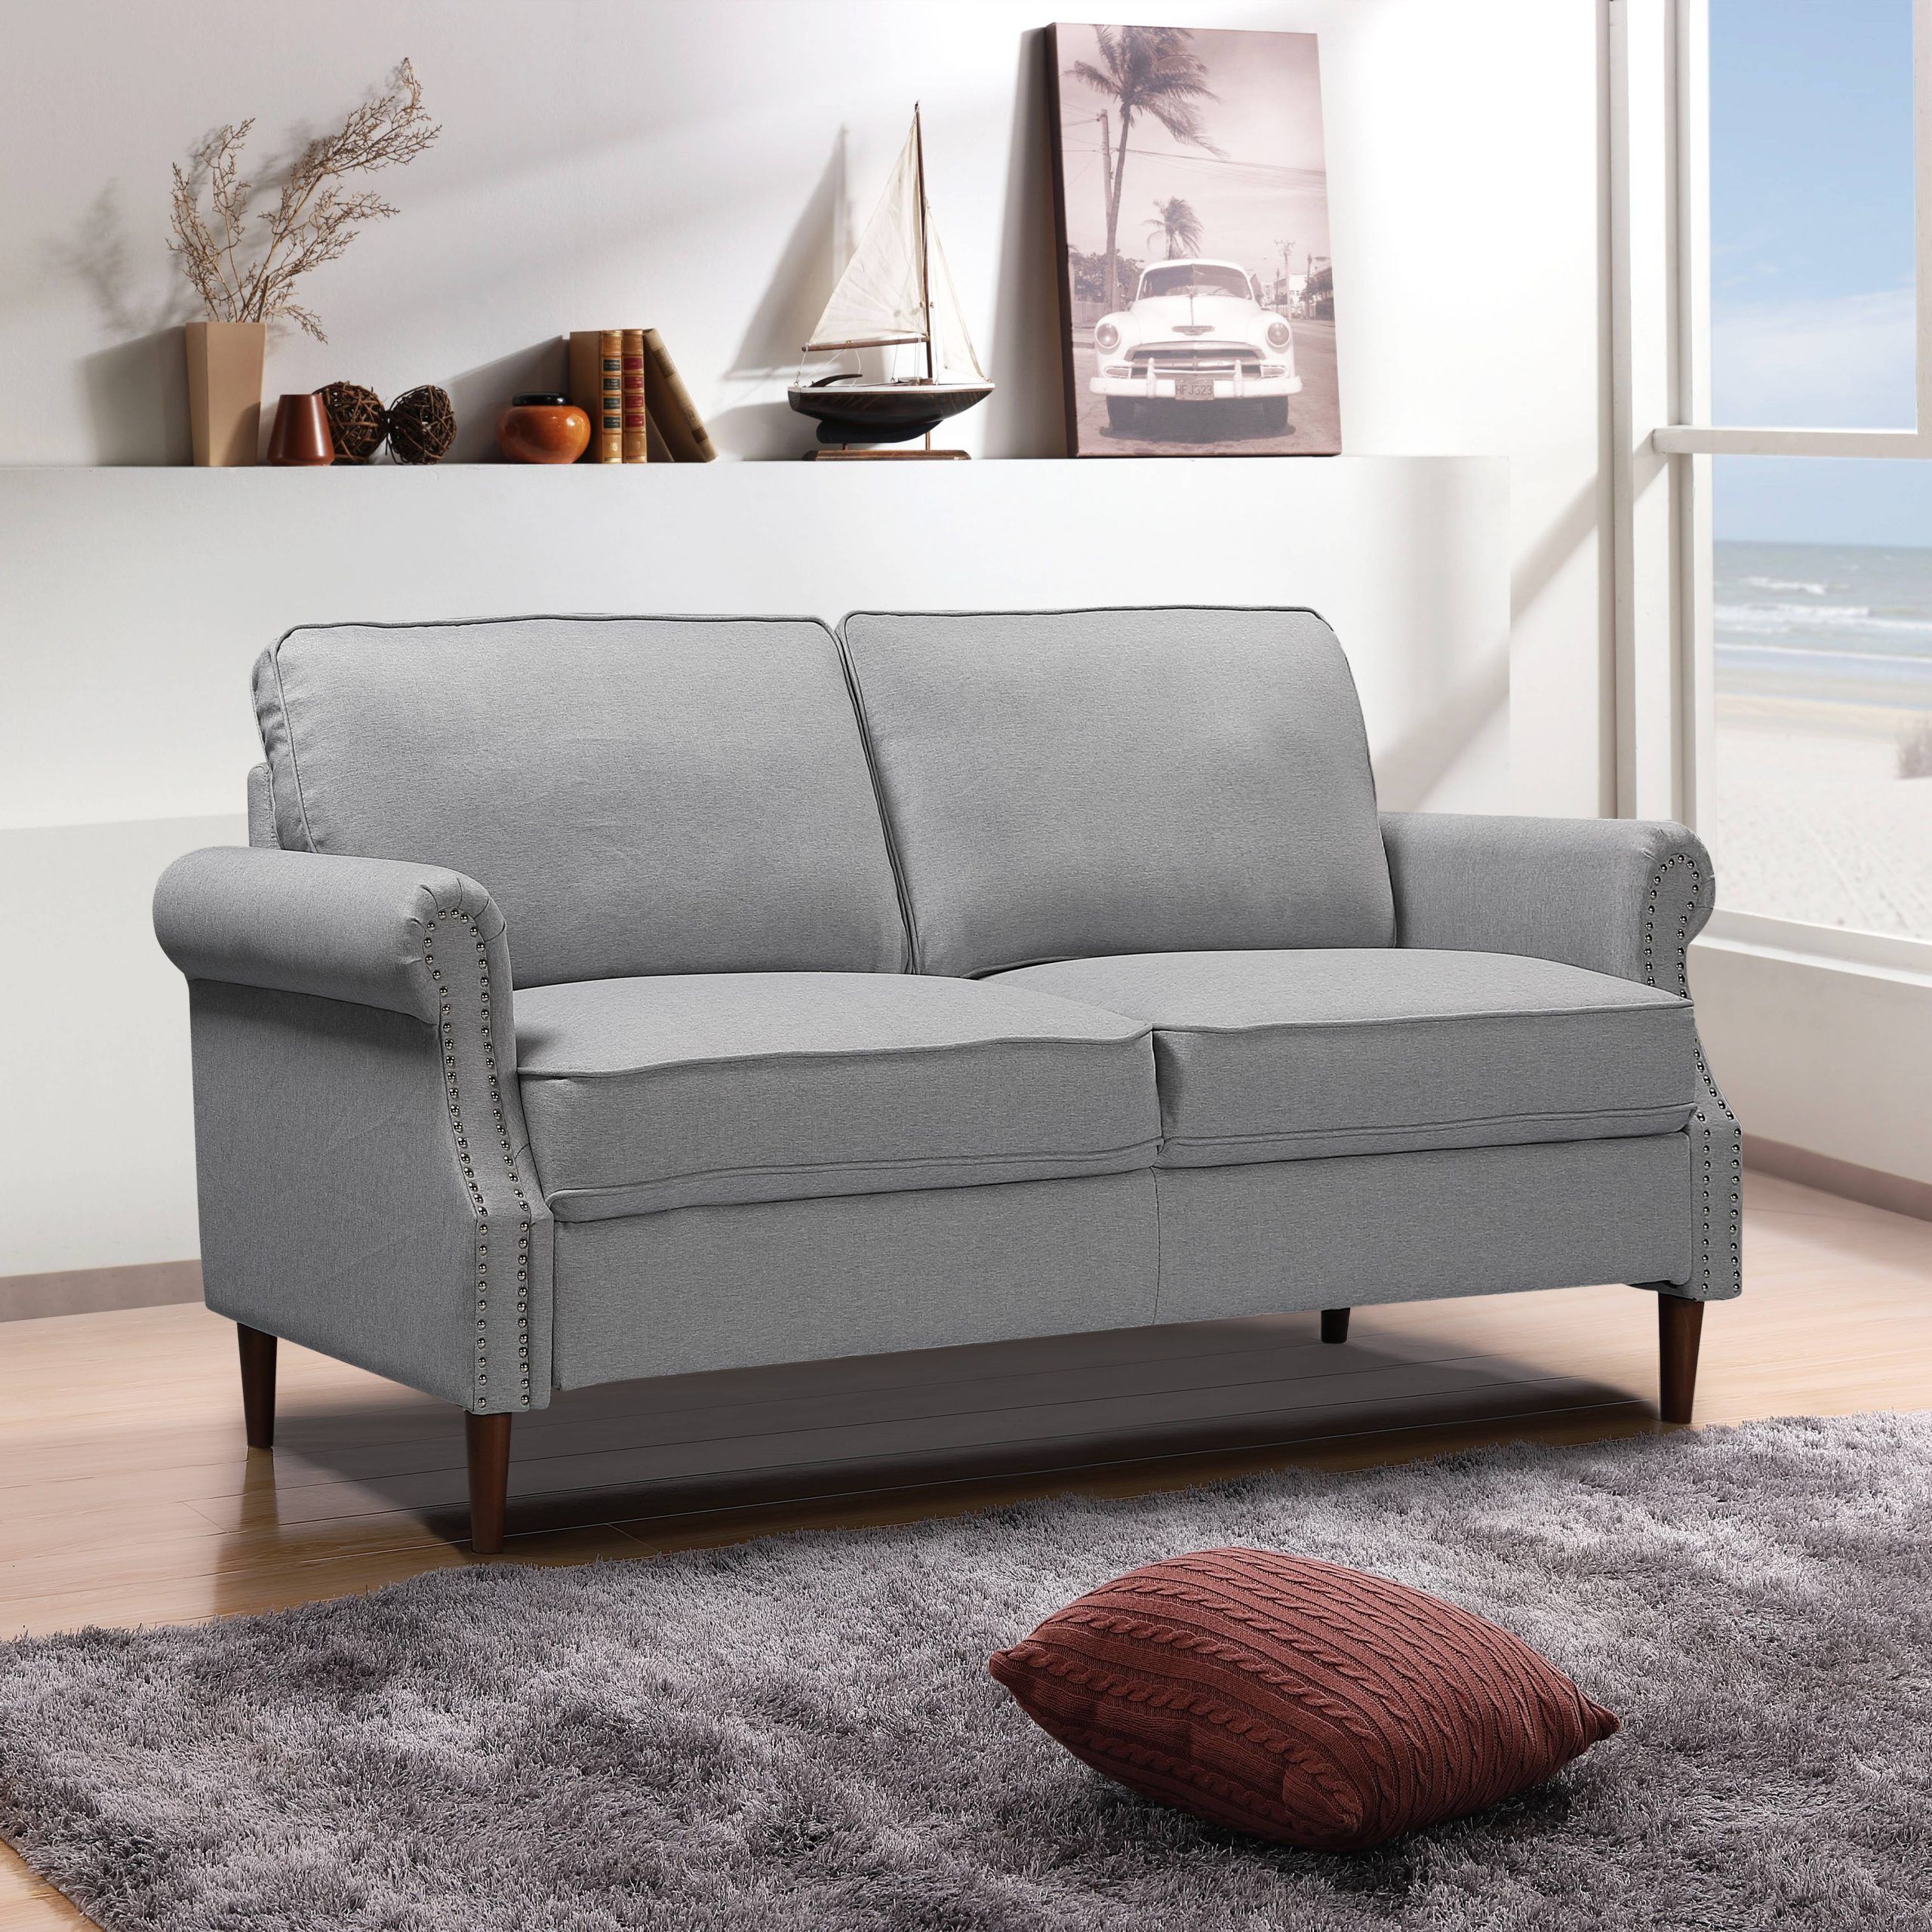 Sofas For Small Spaces Within Well Liked Gray Loveseat, Modern Linen Farbic Sofas For Small Spaces, Upholstered (Photo 14 of 15)